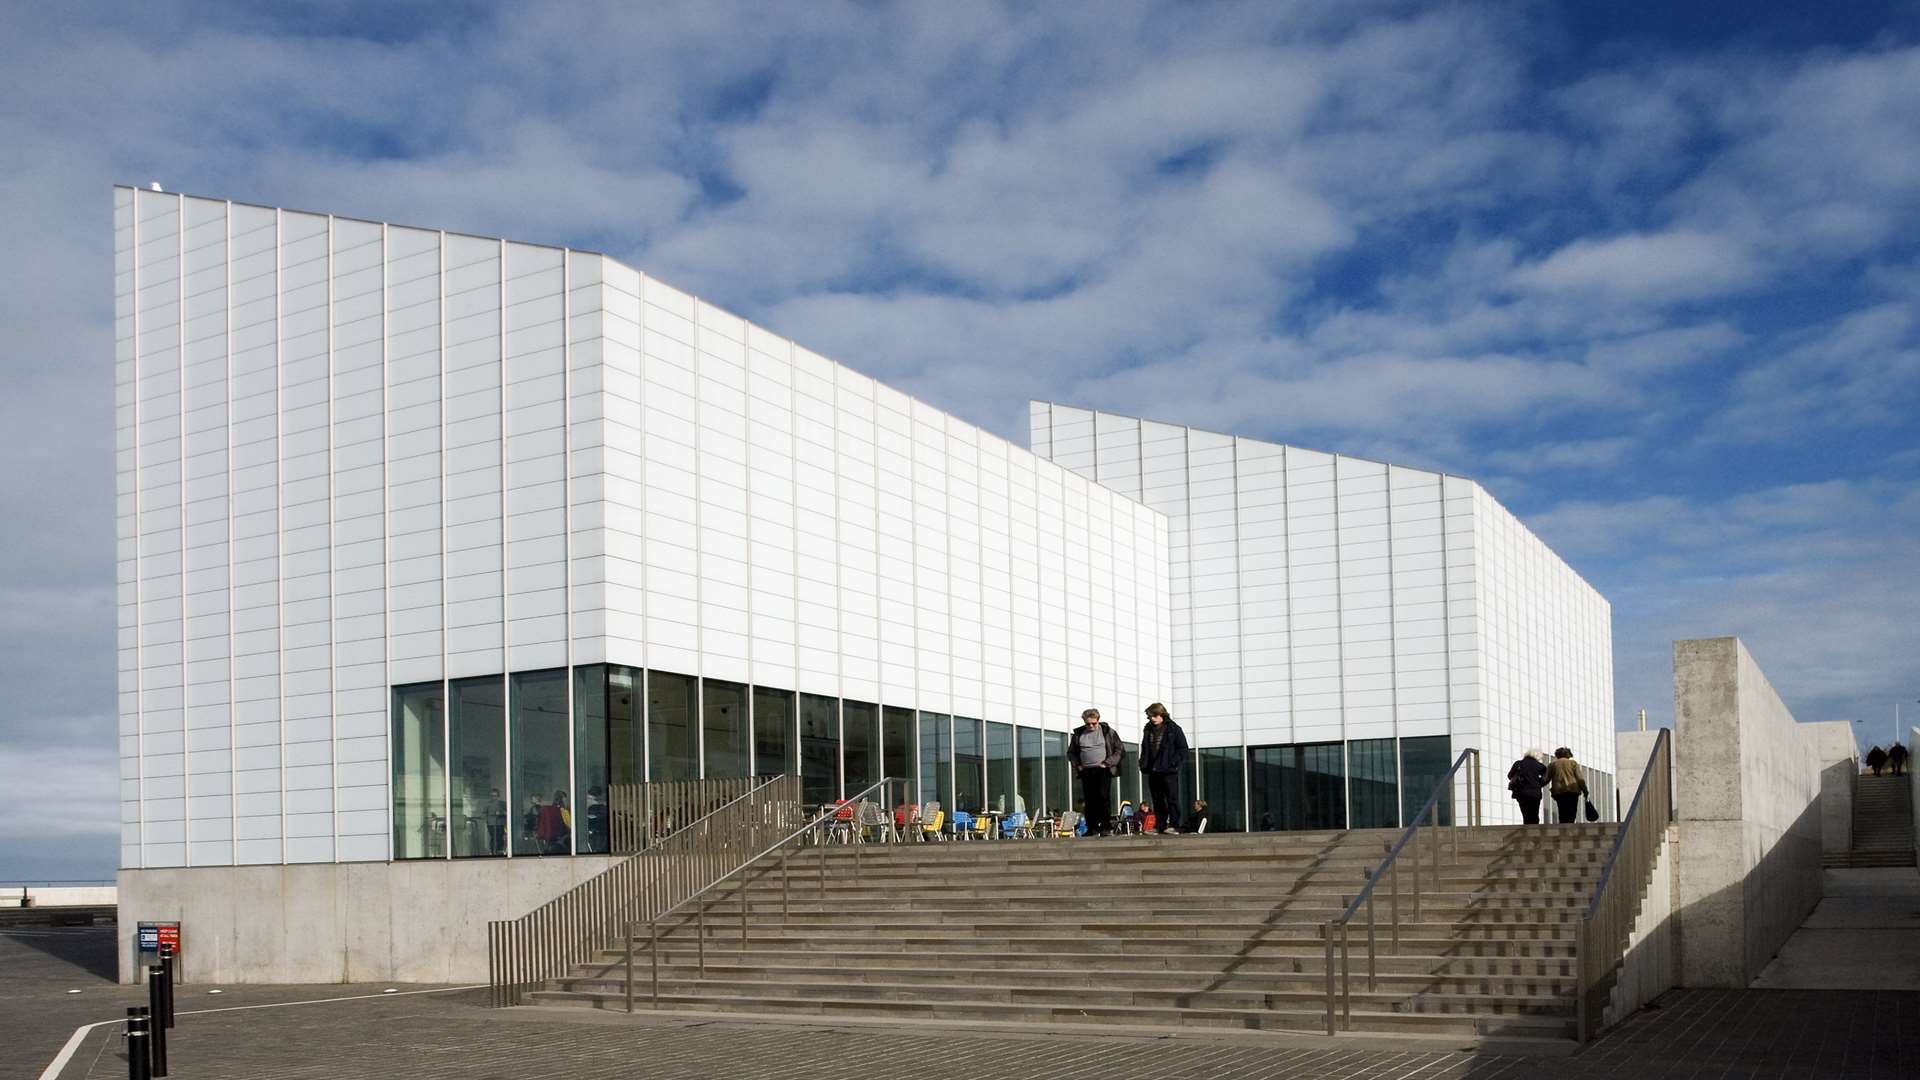 Primary school children can become the boss of Margate's celebrated Turner Contemporary Gallery by taking part in the KM Charity Team's latest creative writing competition.